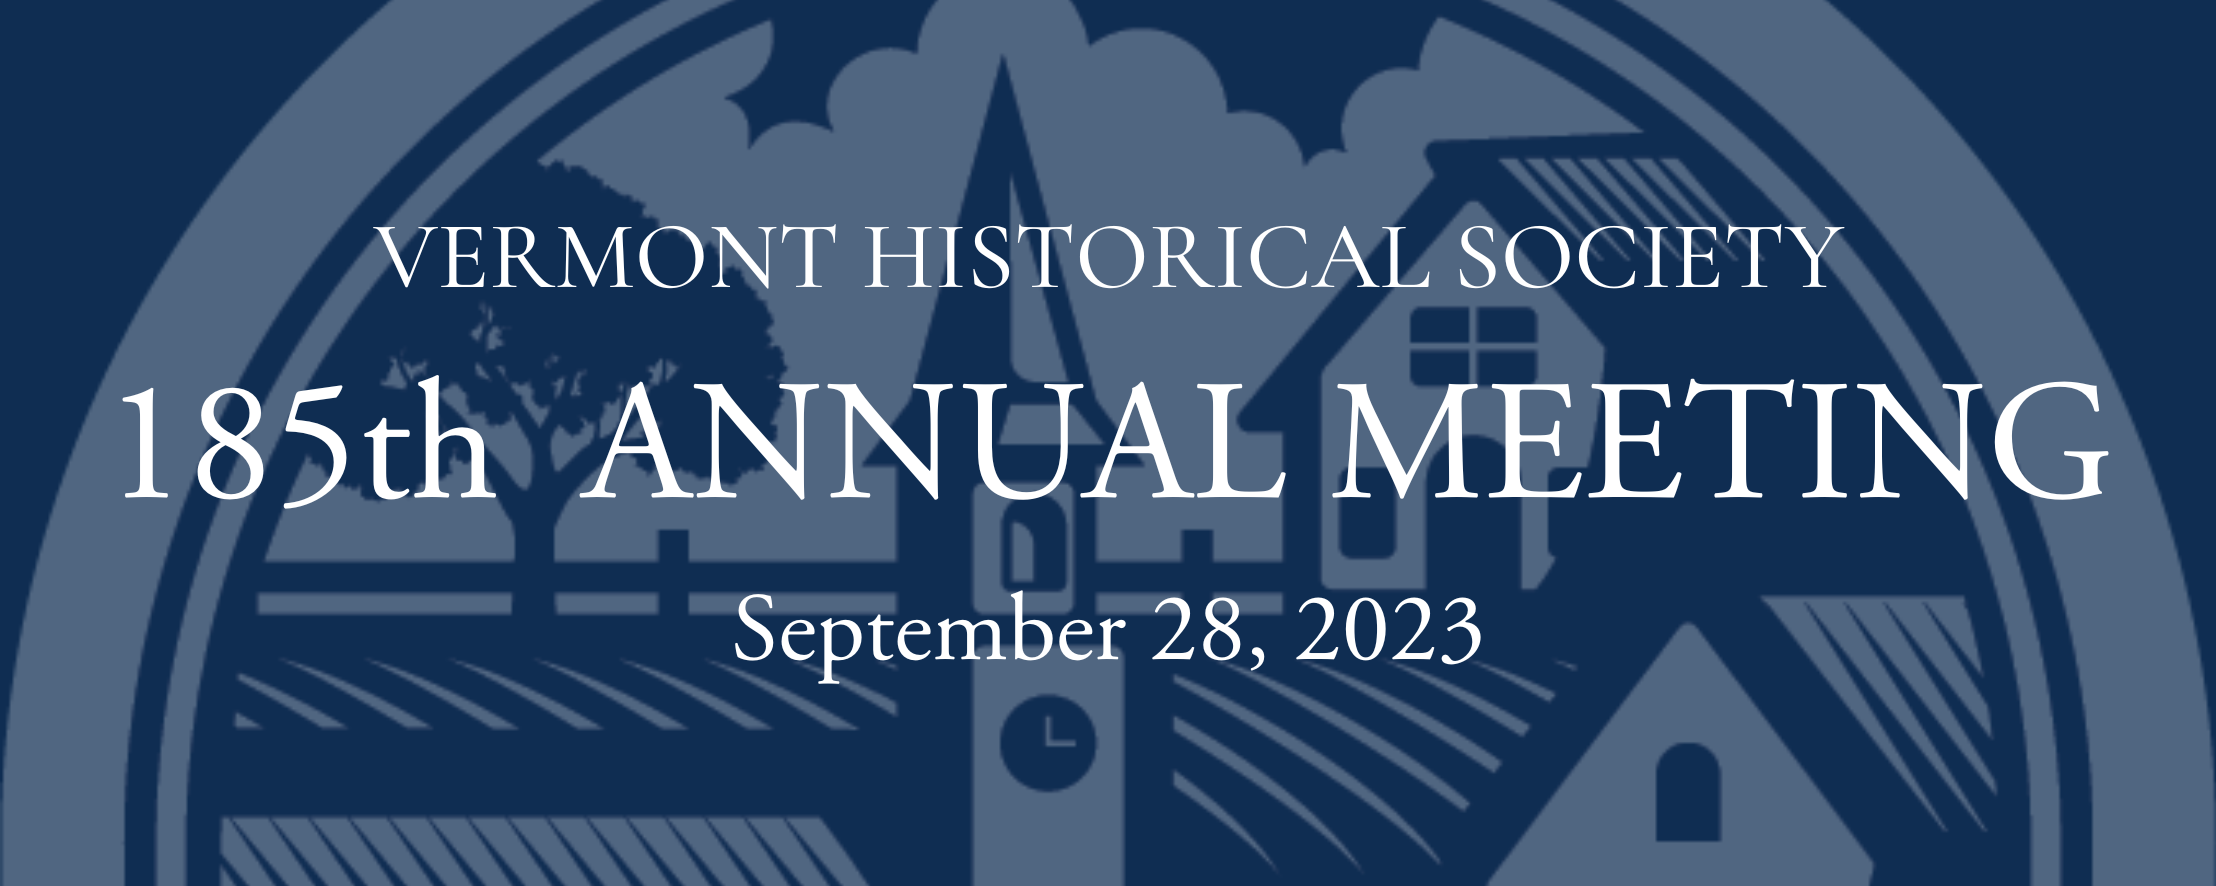 Vermont Historical Society 185th Annual Meeting